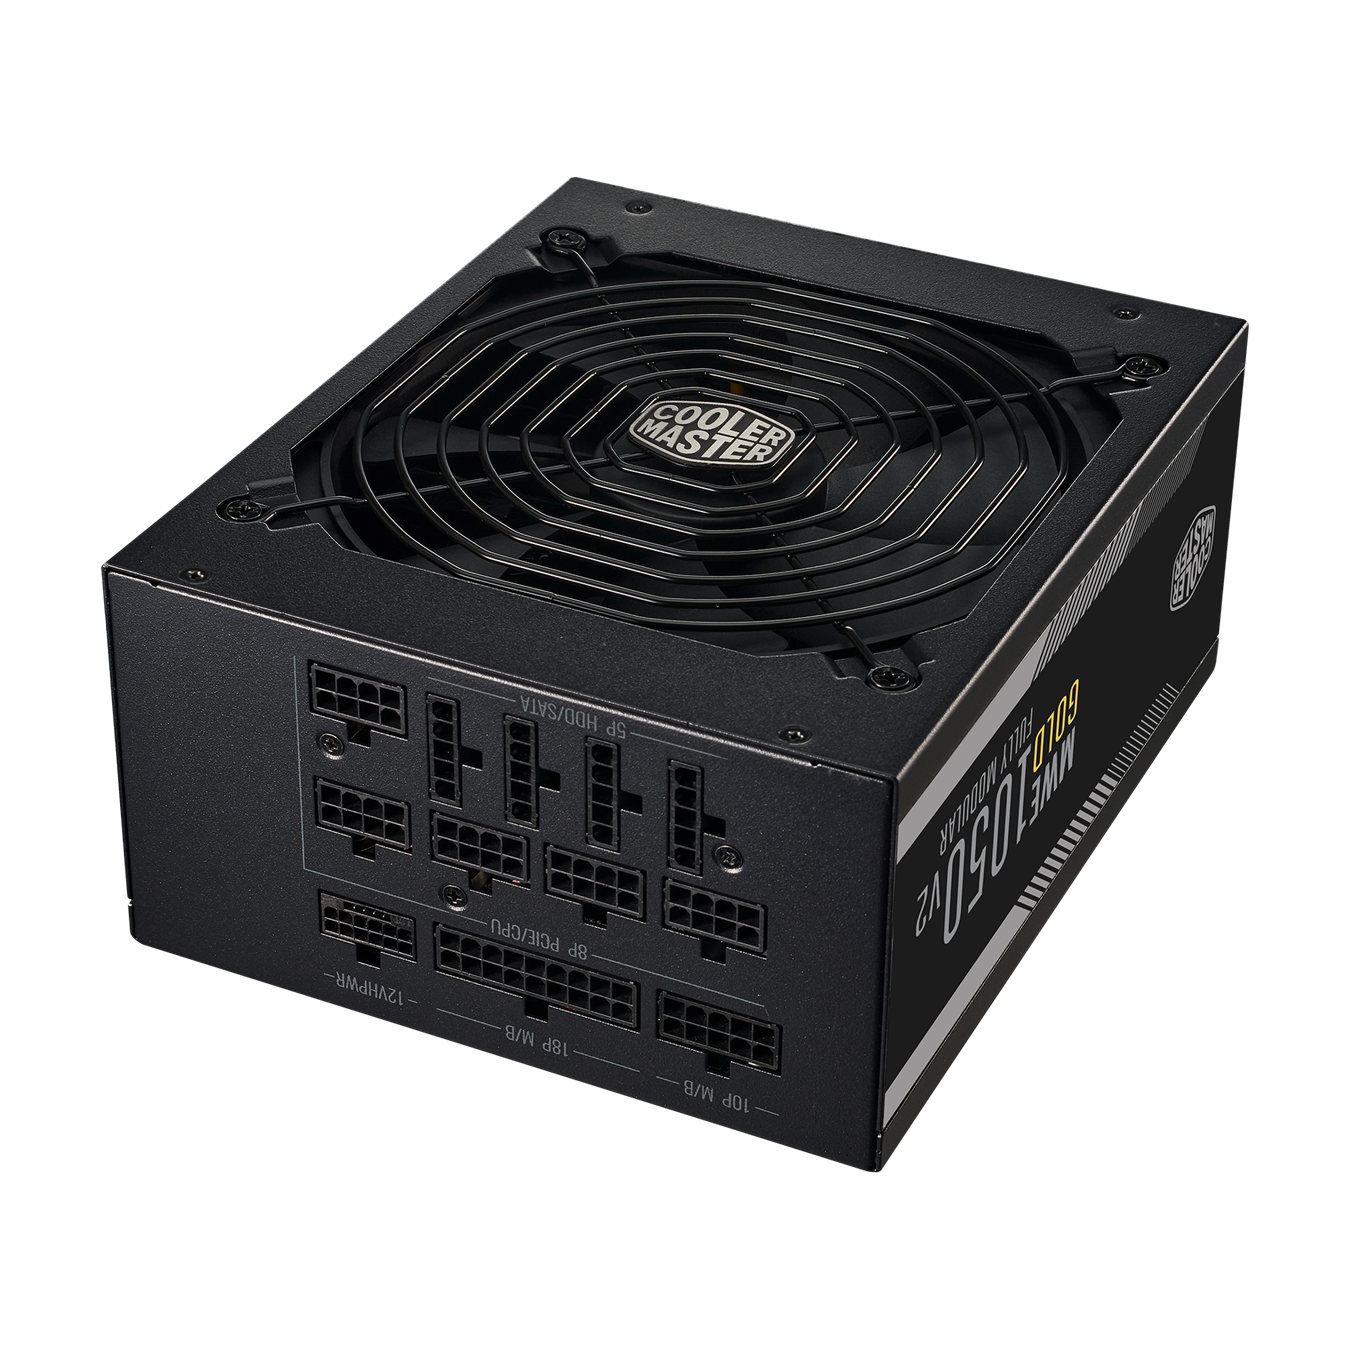 MWE Gold 1050 comes with full modular flat, black cables for increased airflow.